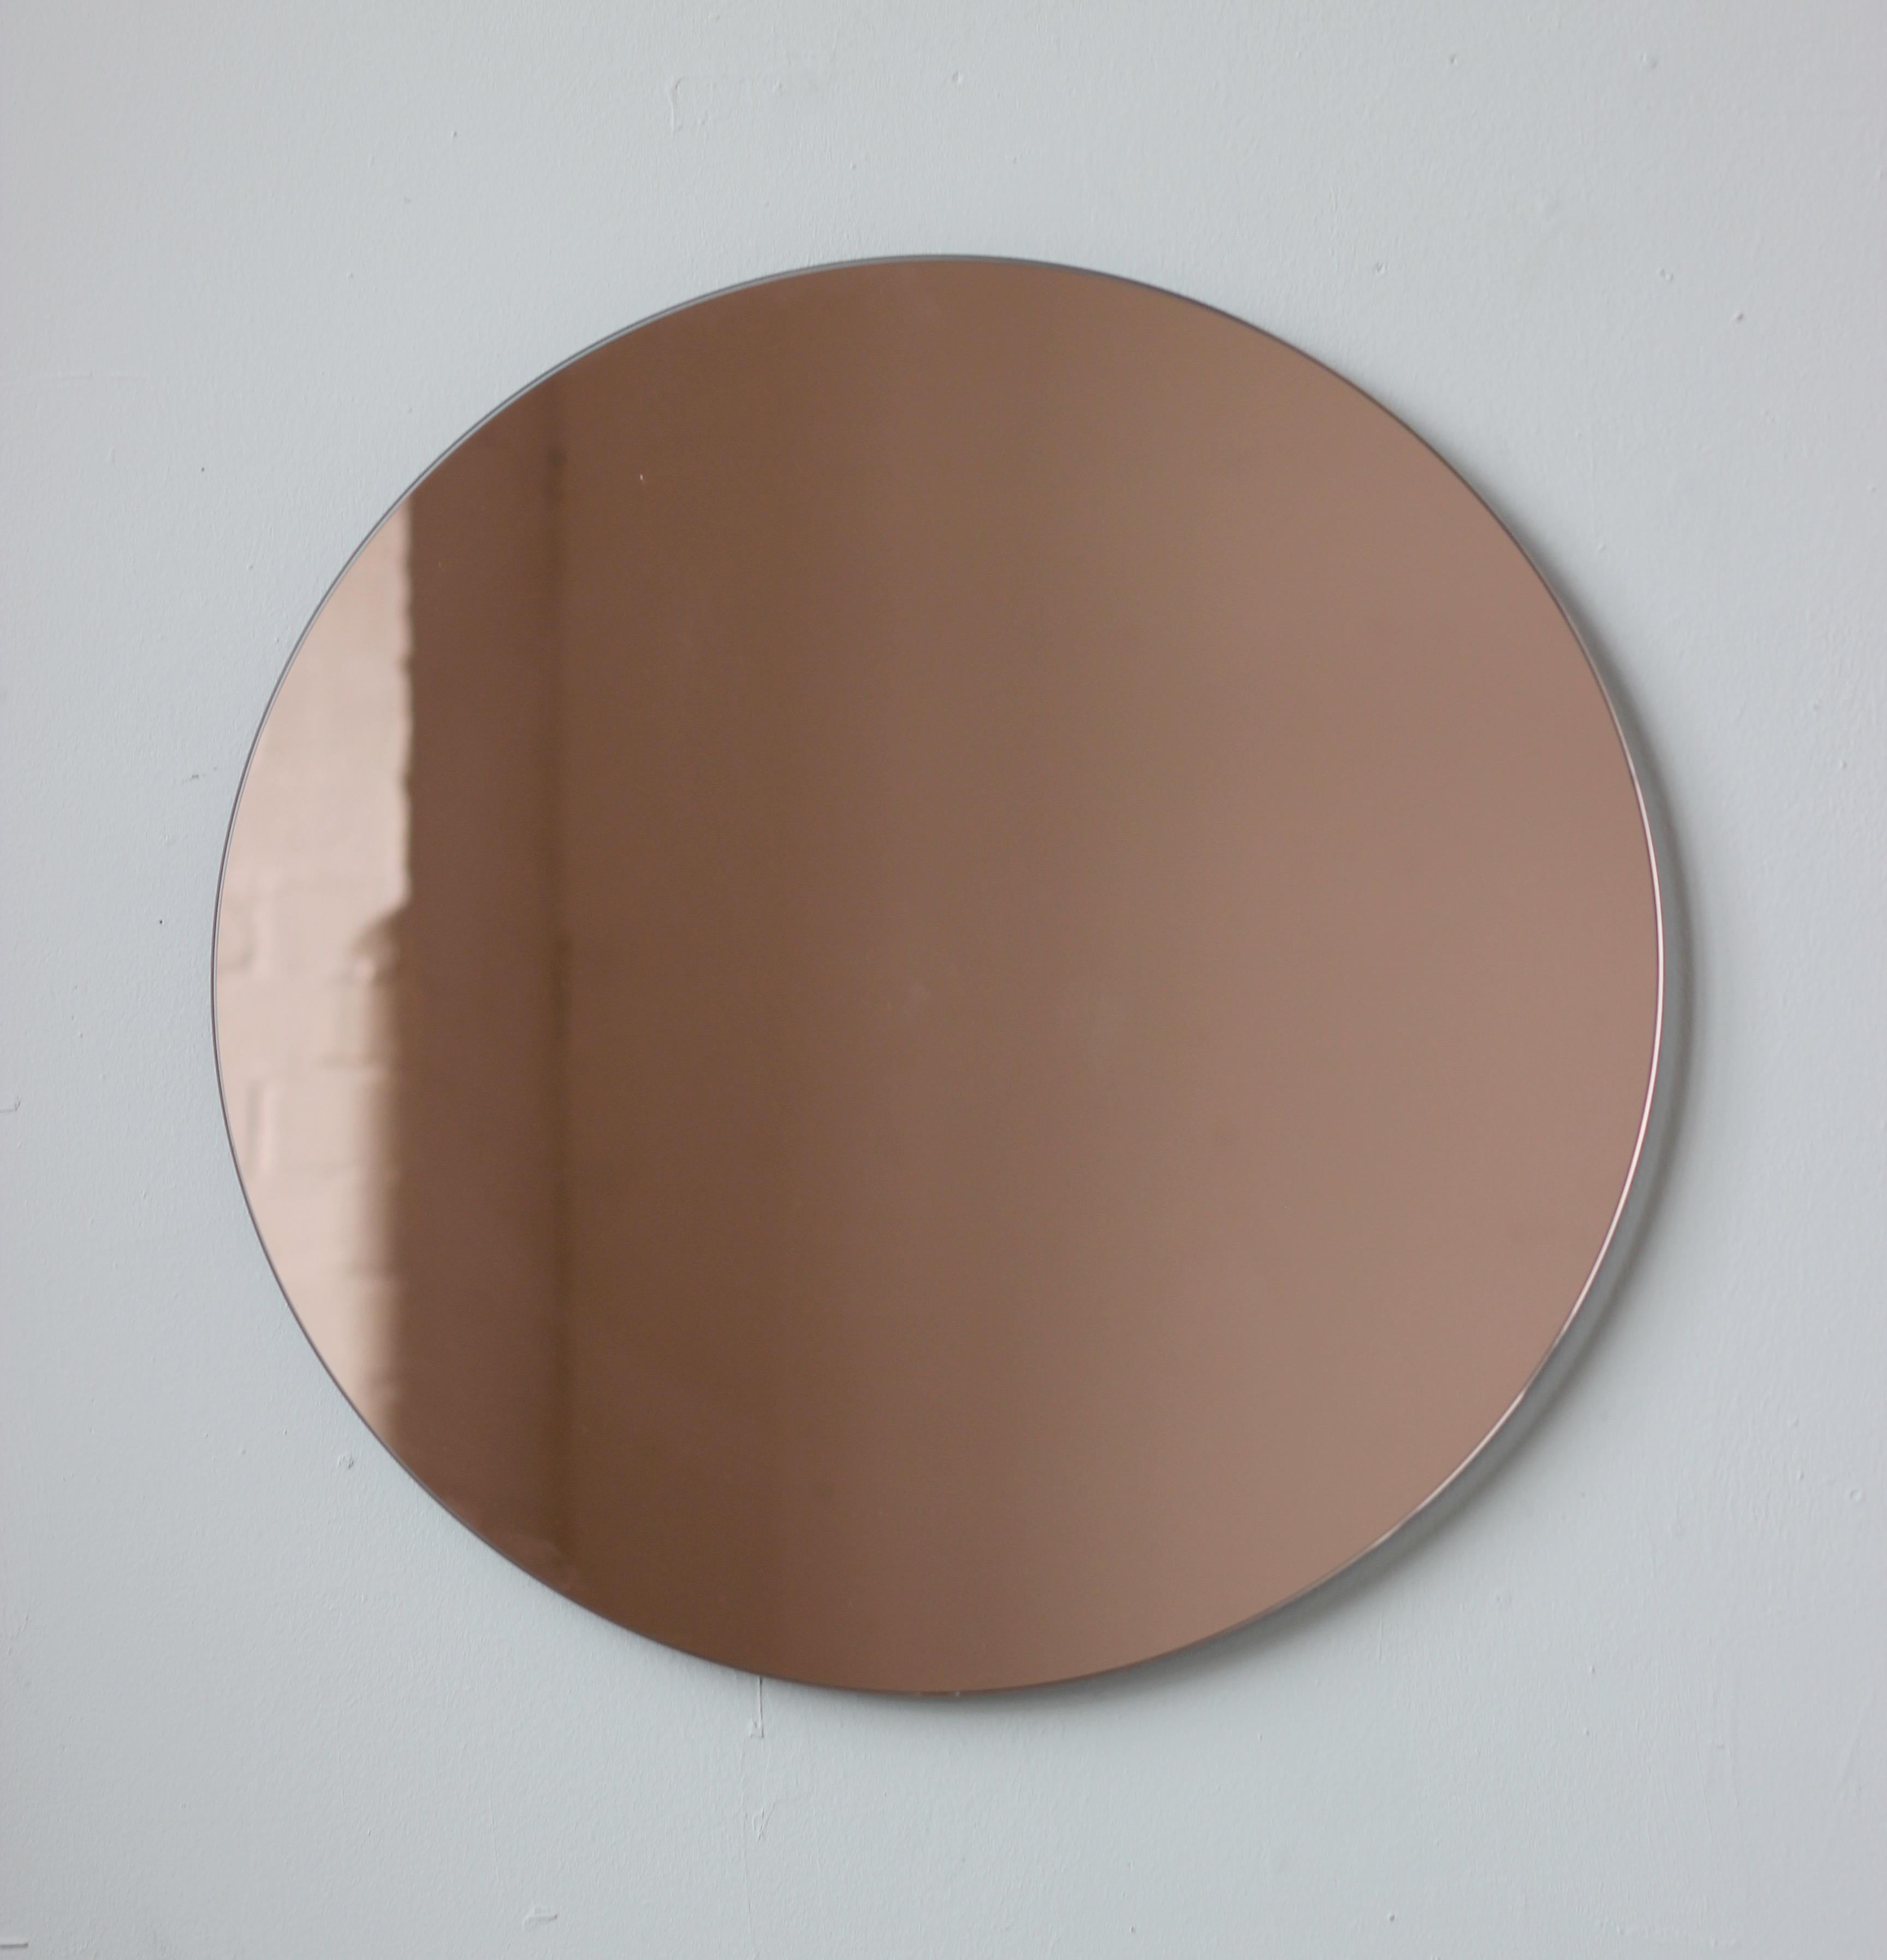 Orbis Rose / Peach Tinted Round Contemporary Frameless Mirror, Large In New Condition For Sale In London, GB